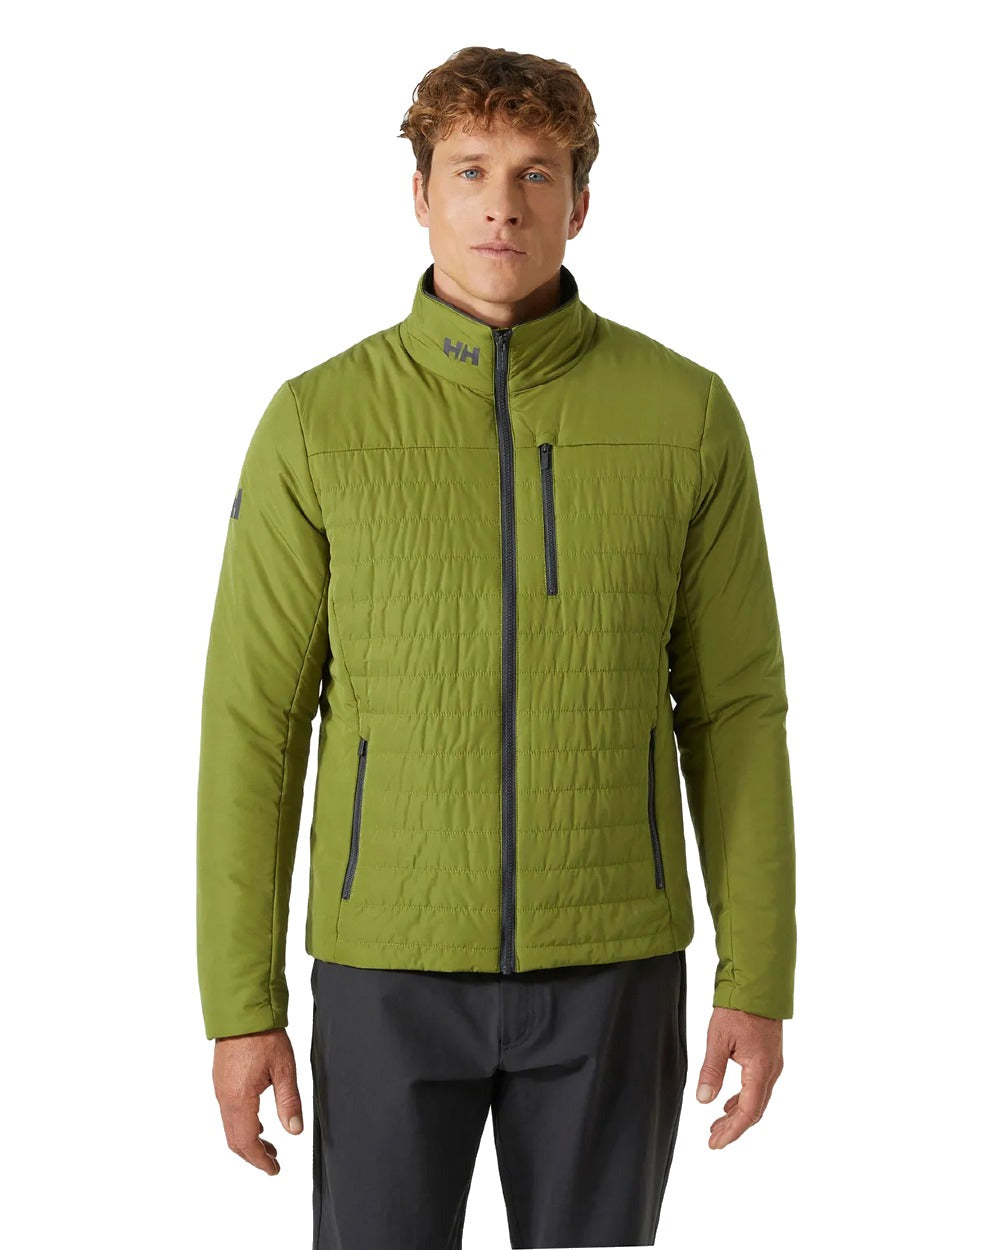 Helly Hansen Mens Crew Insulated Sailing Jacket 2.0 in Olive Green 